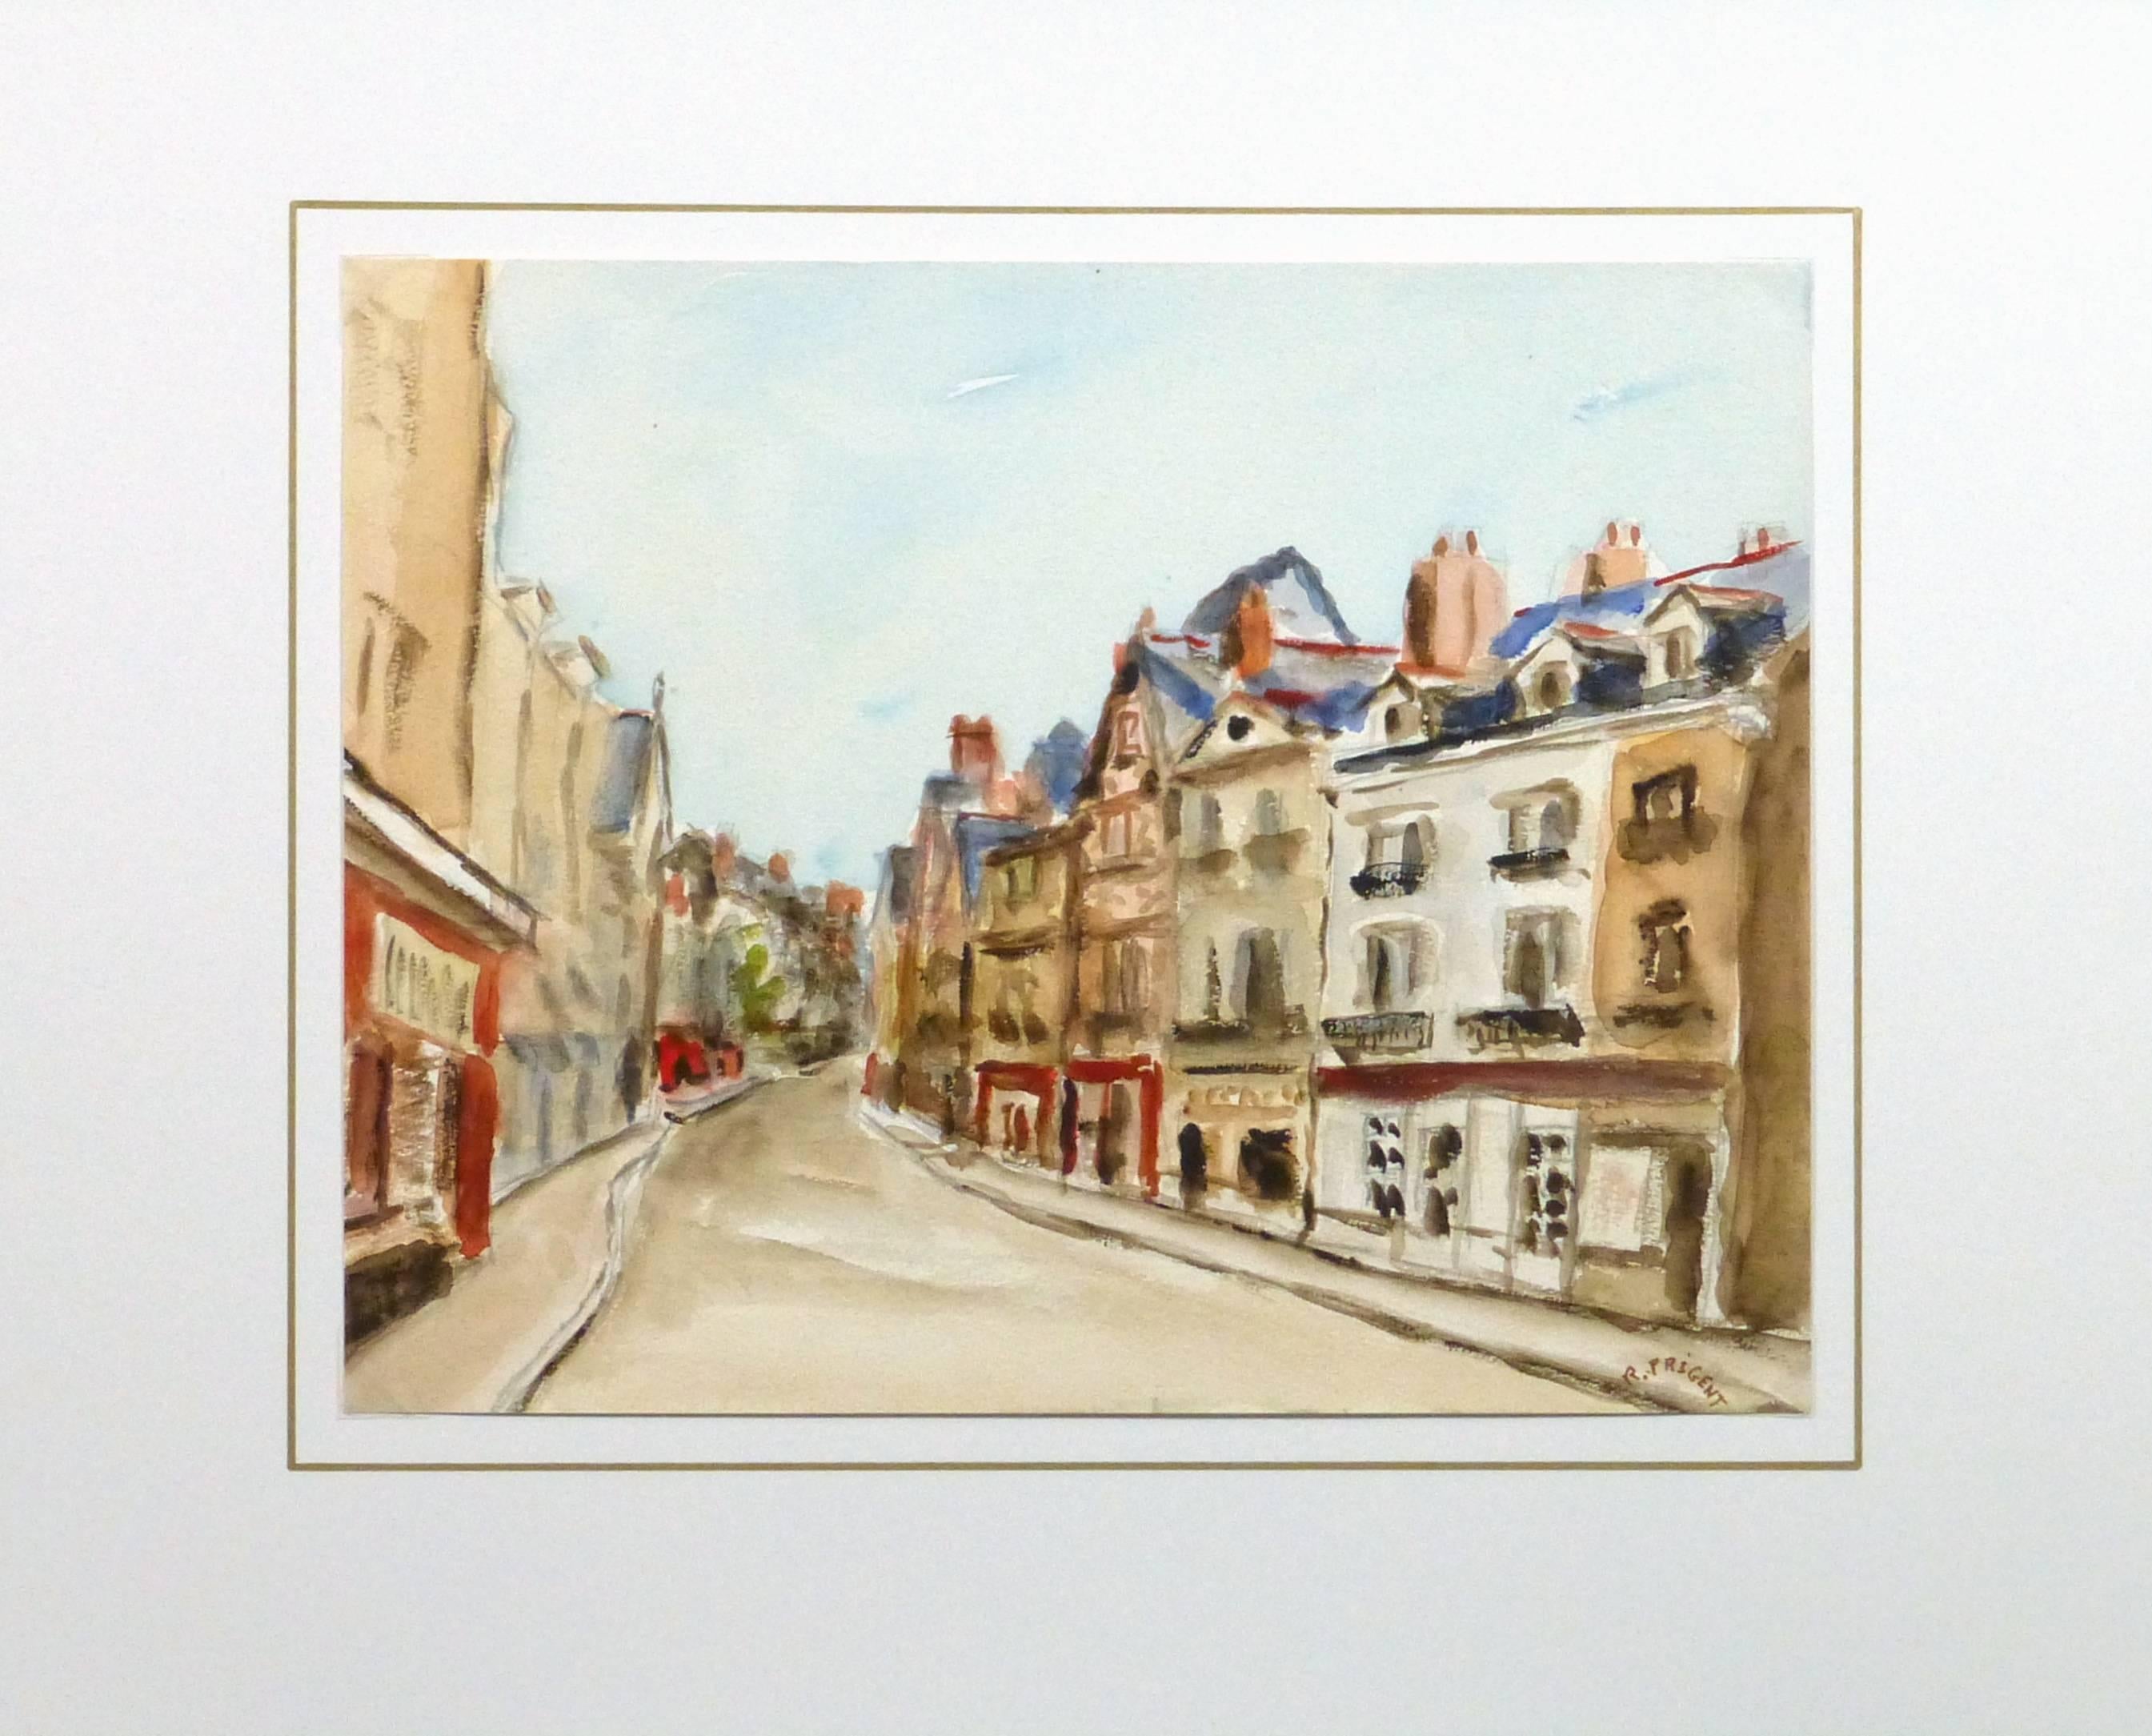 Bright and cheery watercolor of charming homes and buildings lining the streets of Angers, France by R. Prigent, 1970. Signed lower right.

Original one-of-a-kind artwork on paper displayed on a white mat with a gold border. Mat fits a